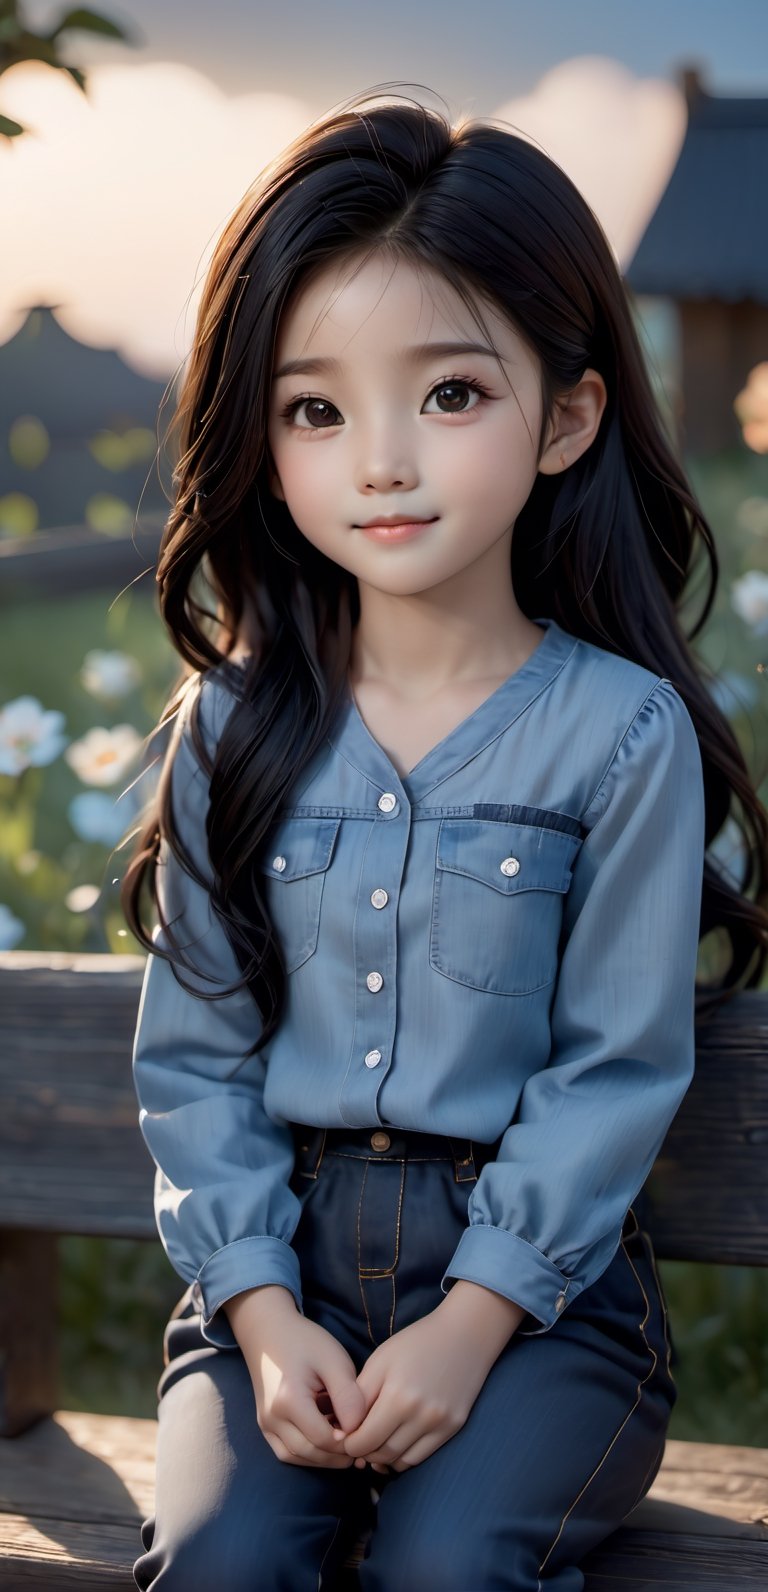 16k, photo close-up, realistic, perfect, soft light and shadow, evening garden, 1 little girl, fair skin, moonlight, clouds, black hair, ball head, flower hair accessories, light strip, smile, denim shirt, black loose Long pants, sitting on an old wooden bench and looking into the distance,korean girl